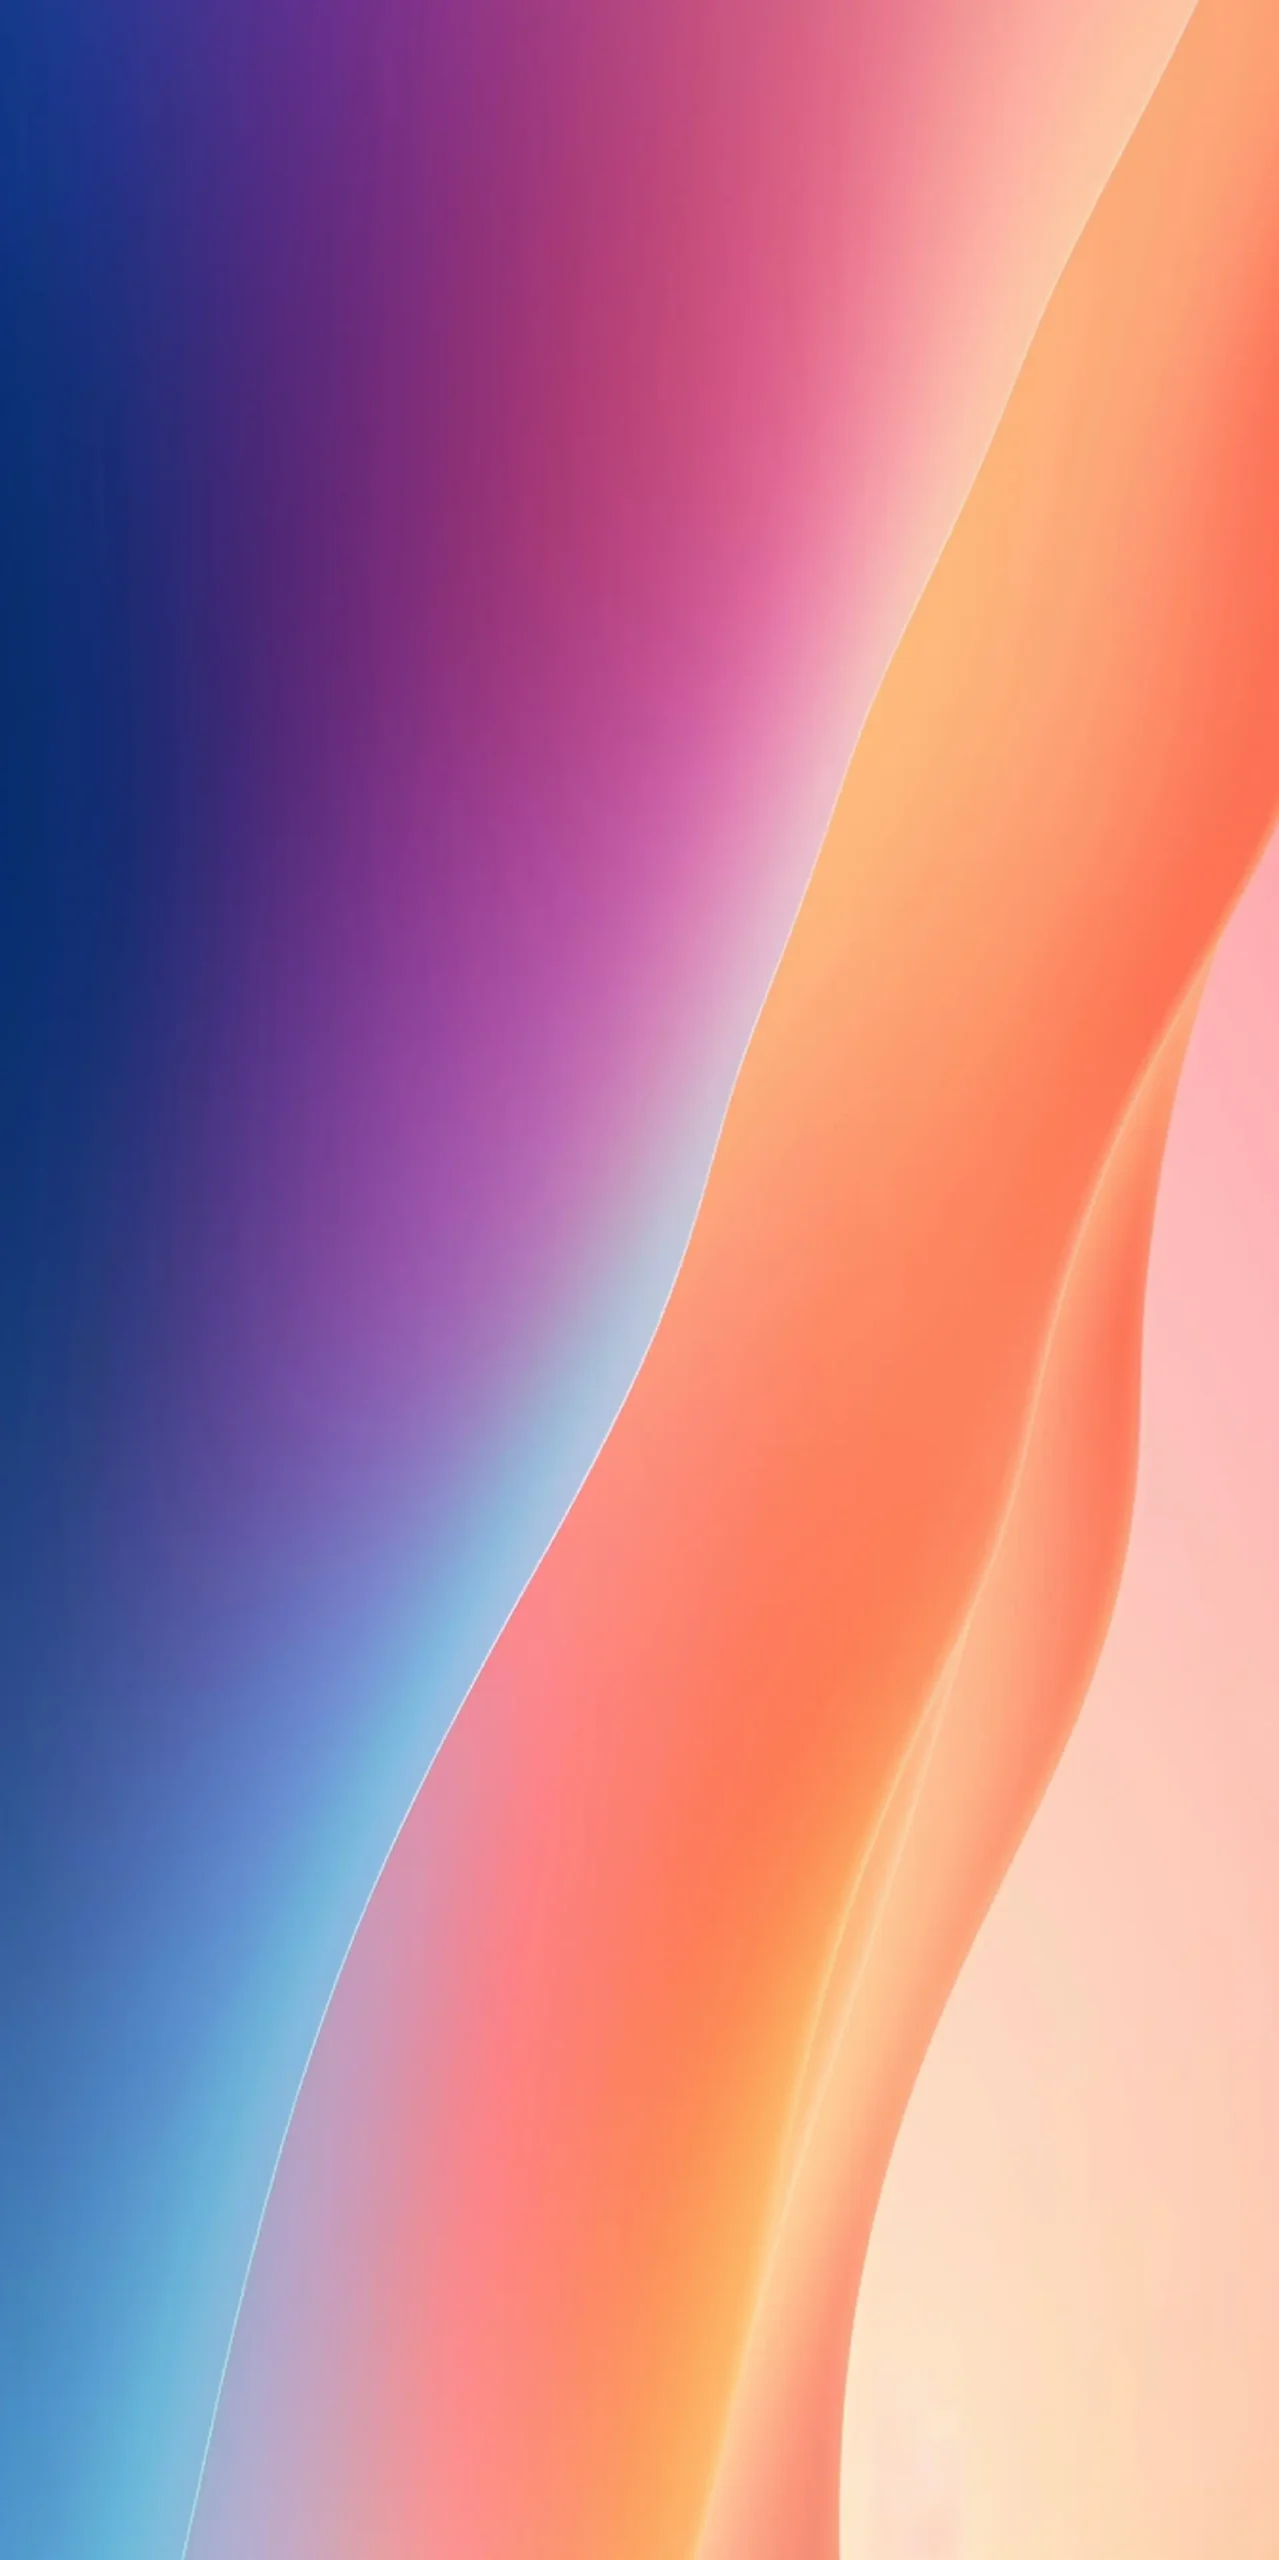 Abstract iPhone wallpaper - 62